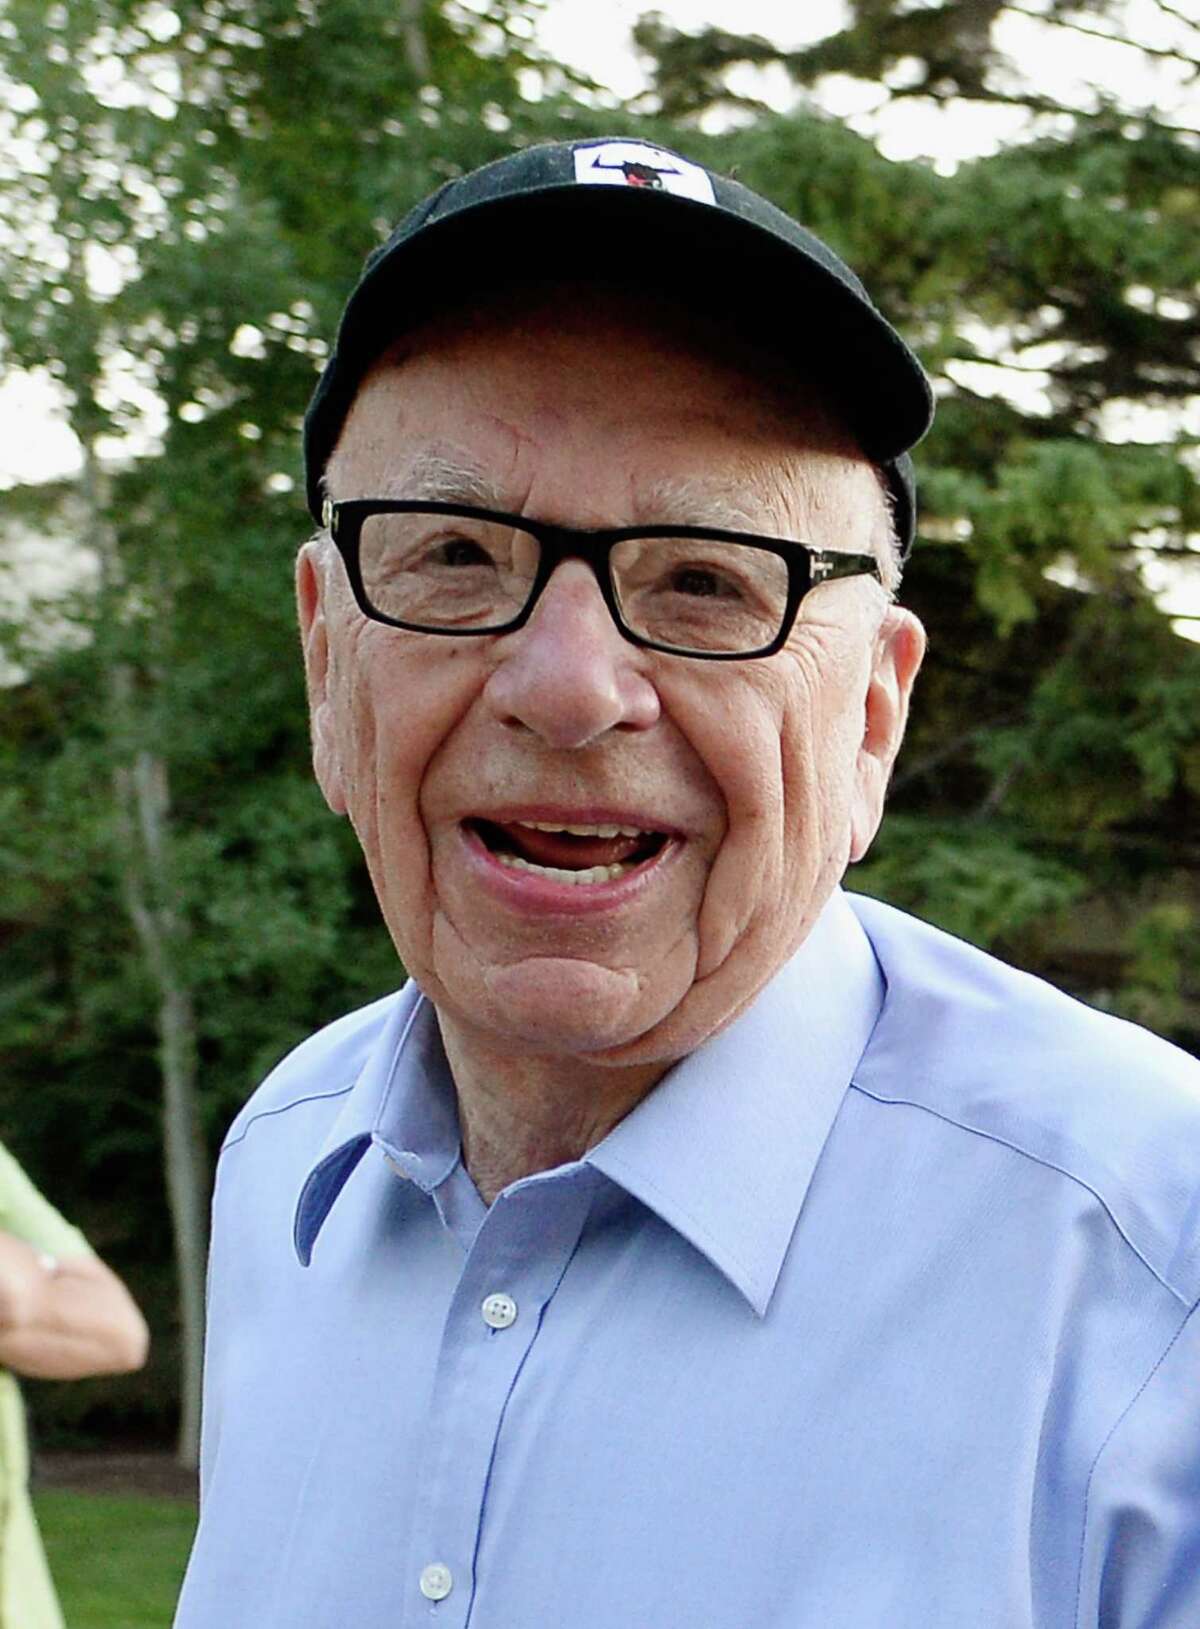 FILE - JULY 16, 2014: It was reported that 21st Century Fox made a bid of $80 billion to buy Time Warner last month, July 16, 2014. SUN VALLEY, ID - JULY 10: Media mogul Rupert Murdoch executive chairman of News Corporation and chairman and CEO of 21st Century Fox arrives for the Allen & Co. annual conference at the Sun Valley Resort on July 10, 2013 in Sun Valley, Idaho. The resort will host corporate leaders for the 31st annual Allen & Co. media and technology conference where some of the wealthiest and most powerful executives in media, finance, politics and tech gather for weeklong meetings. Past attendees included Warren Buffett, Bill Gates and Mark Zuckerberg. (Photo by Kevork Djansezian/Getty Images)